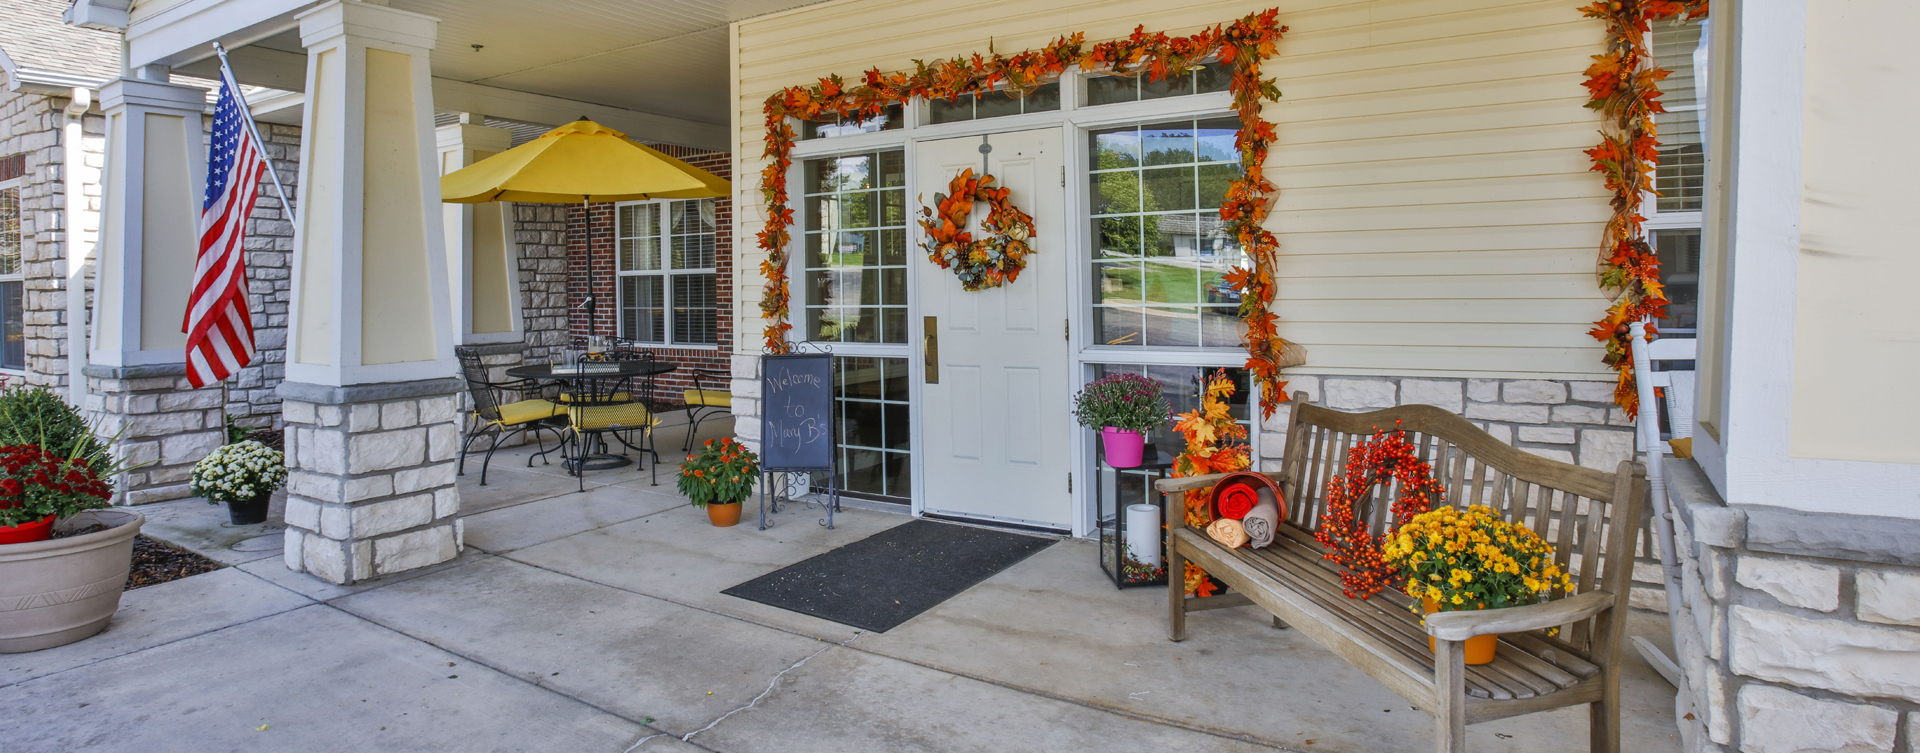 Sip on your favorite drink on the porch at Bickford of Peoria